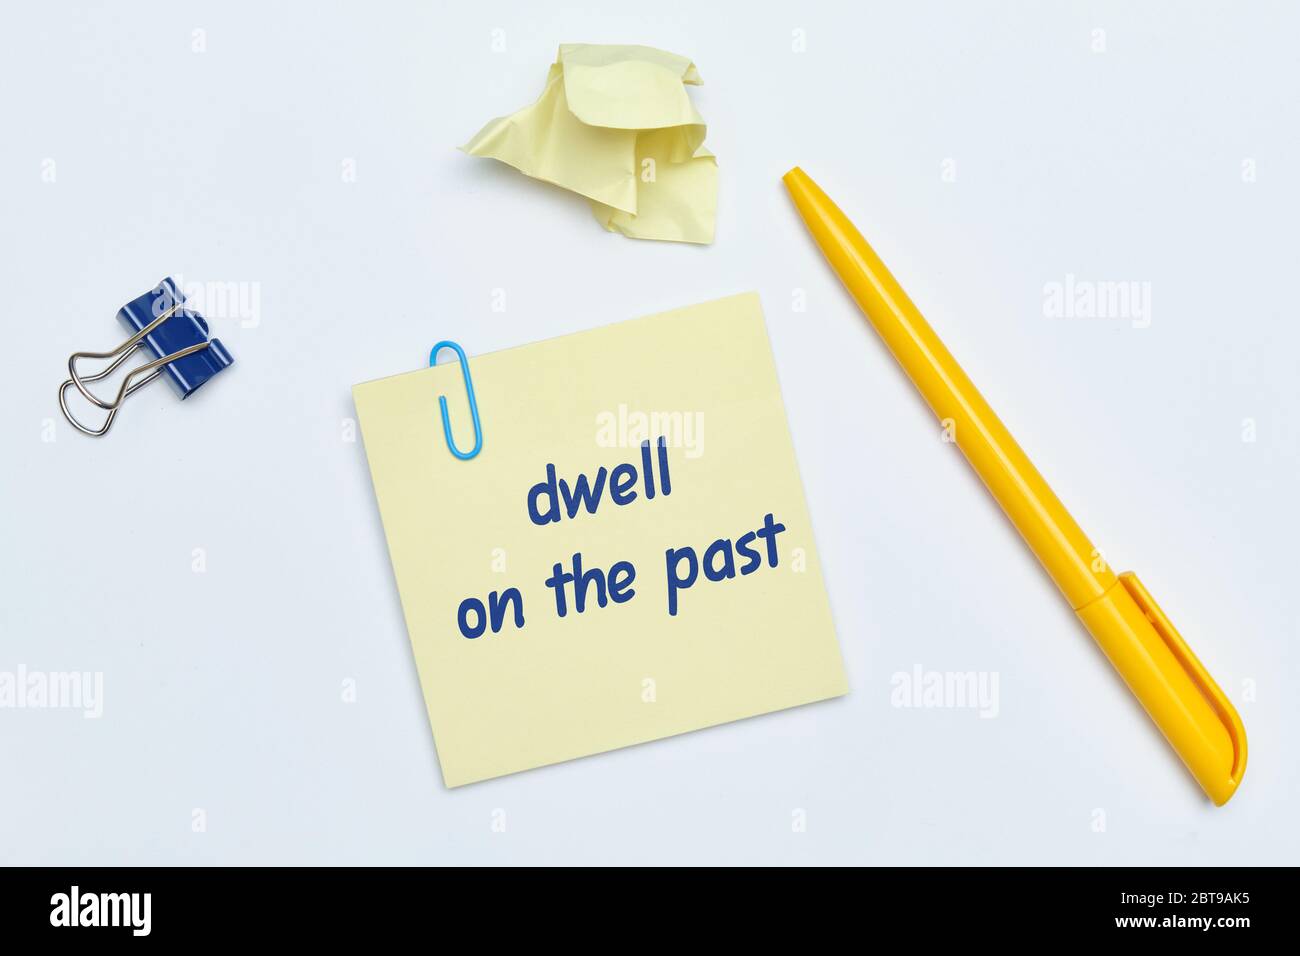 English idiom hand lettering about time - dwell on the past on wooden blocks. Close up. Stock Photo